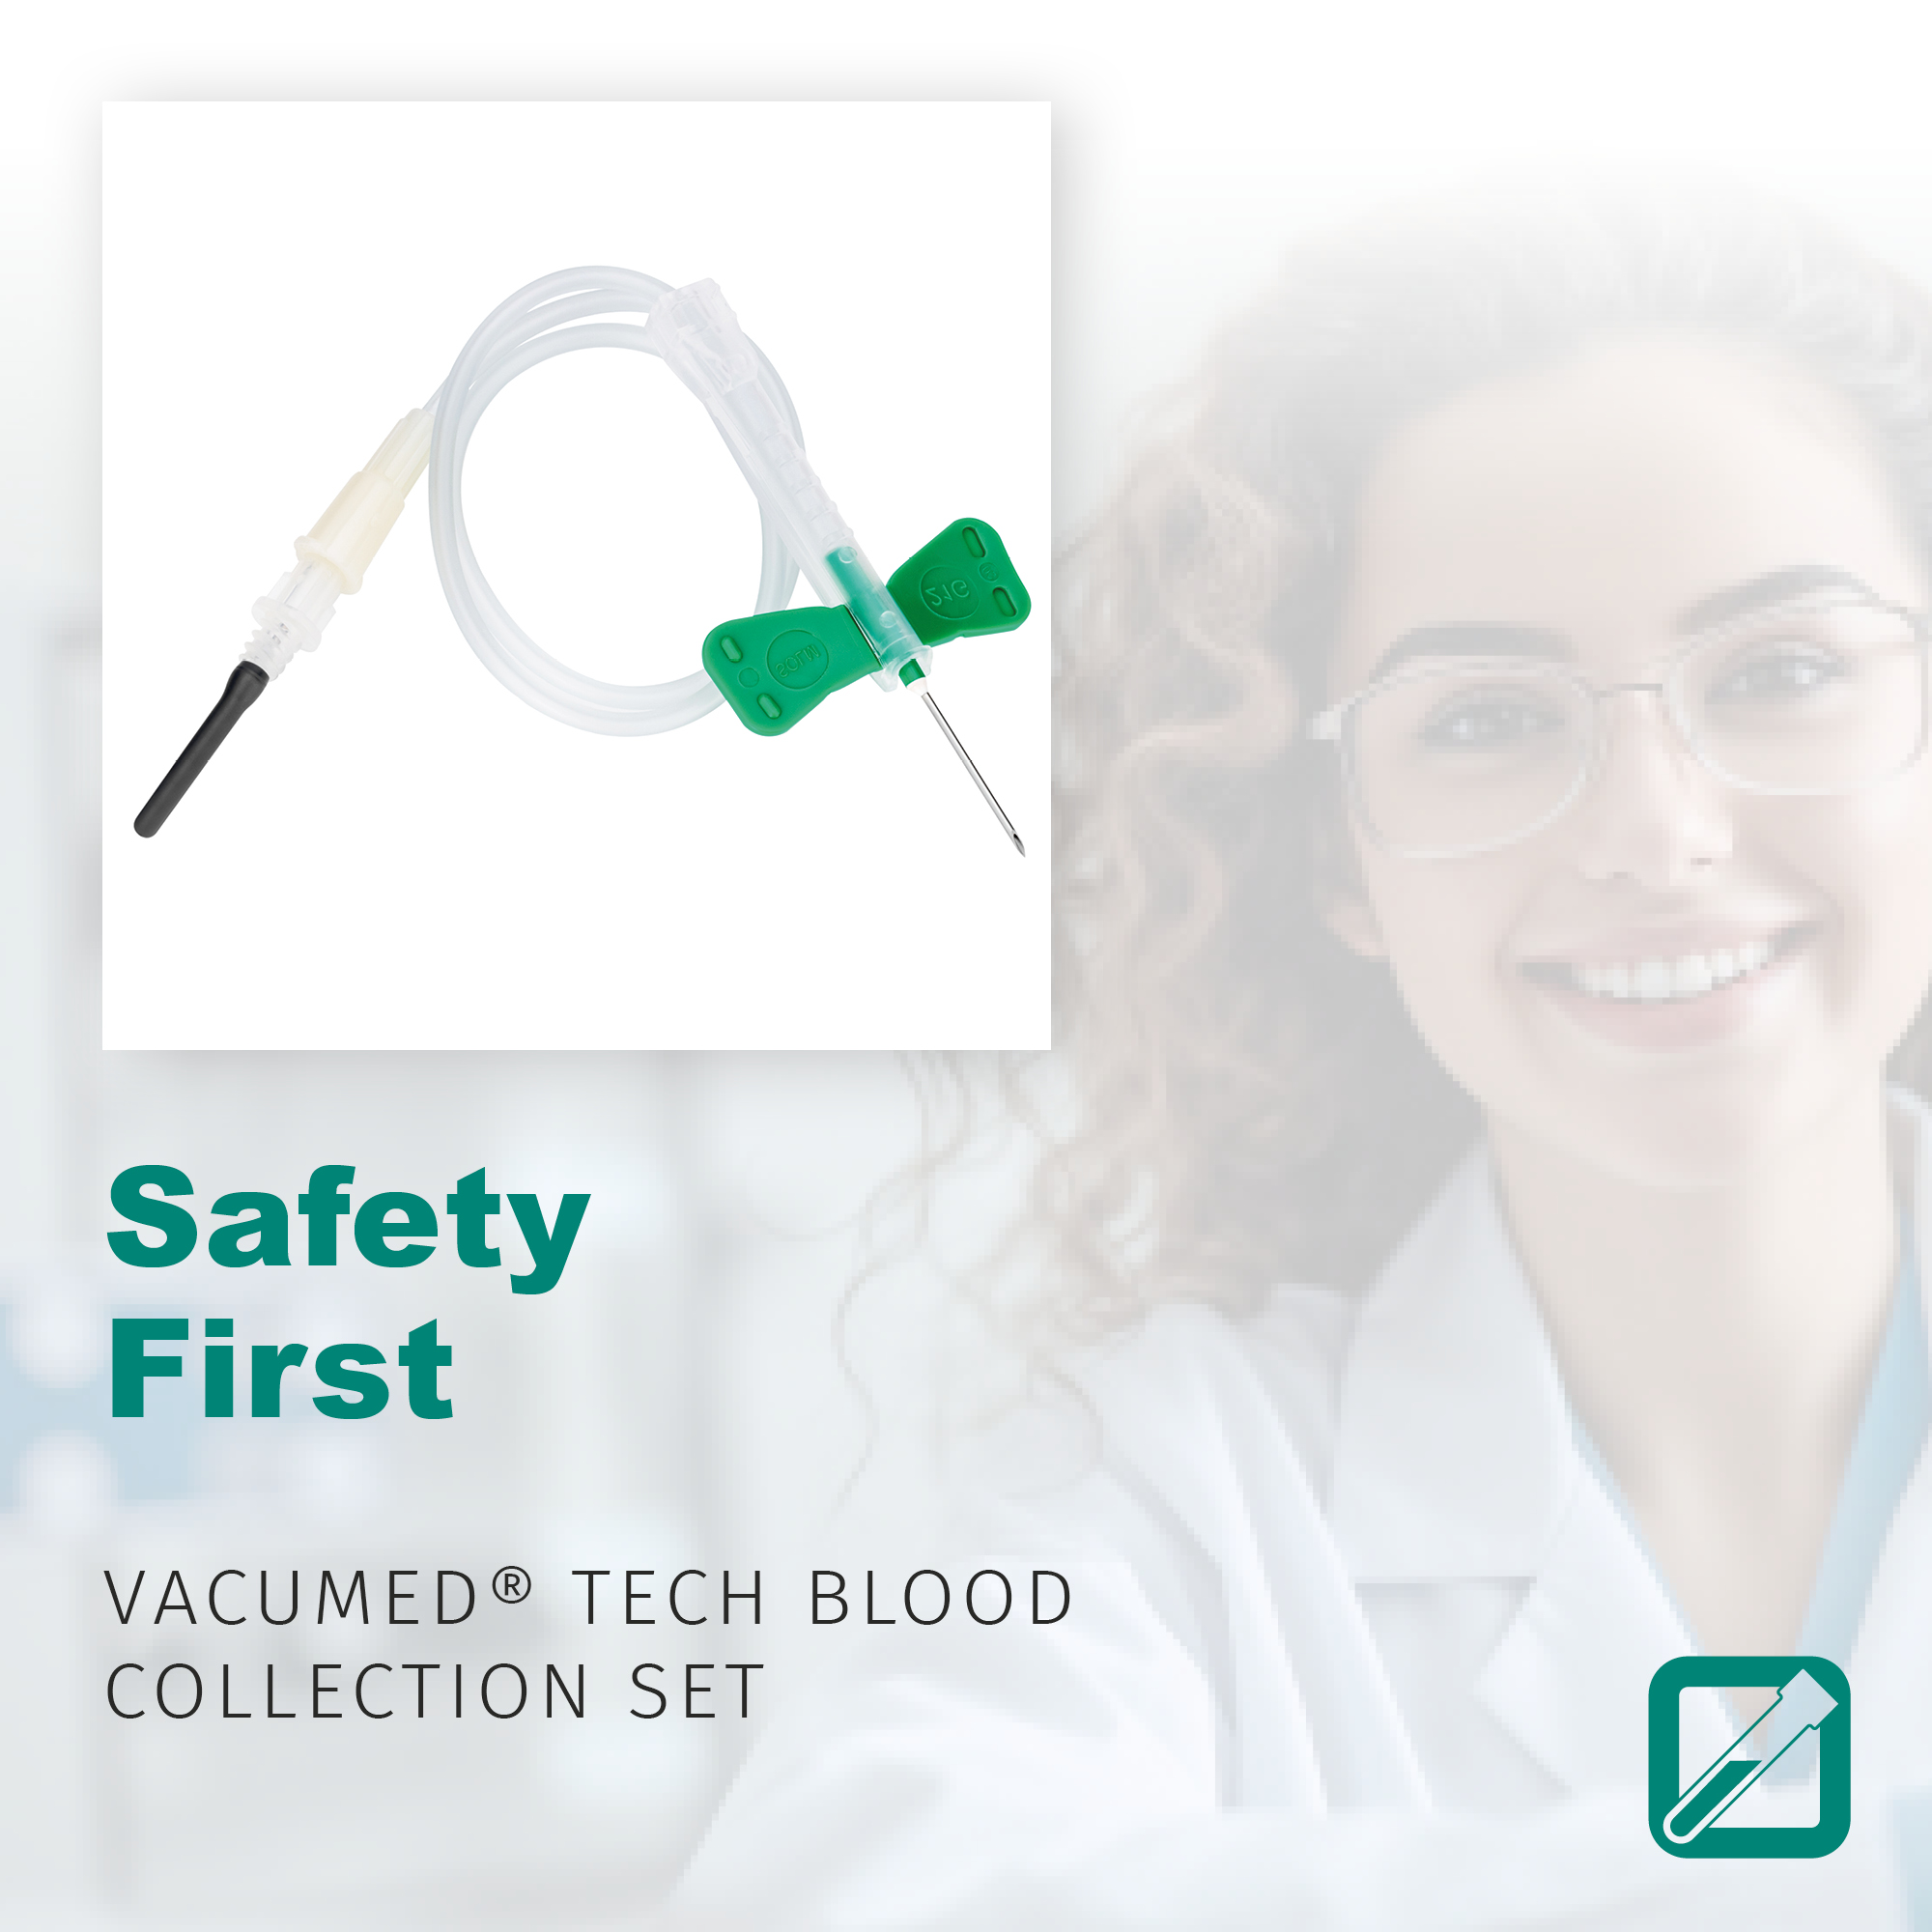 Safety First. Vacumed® Tech Blood collection set